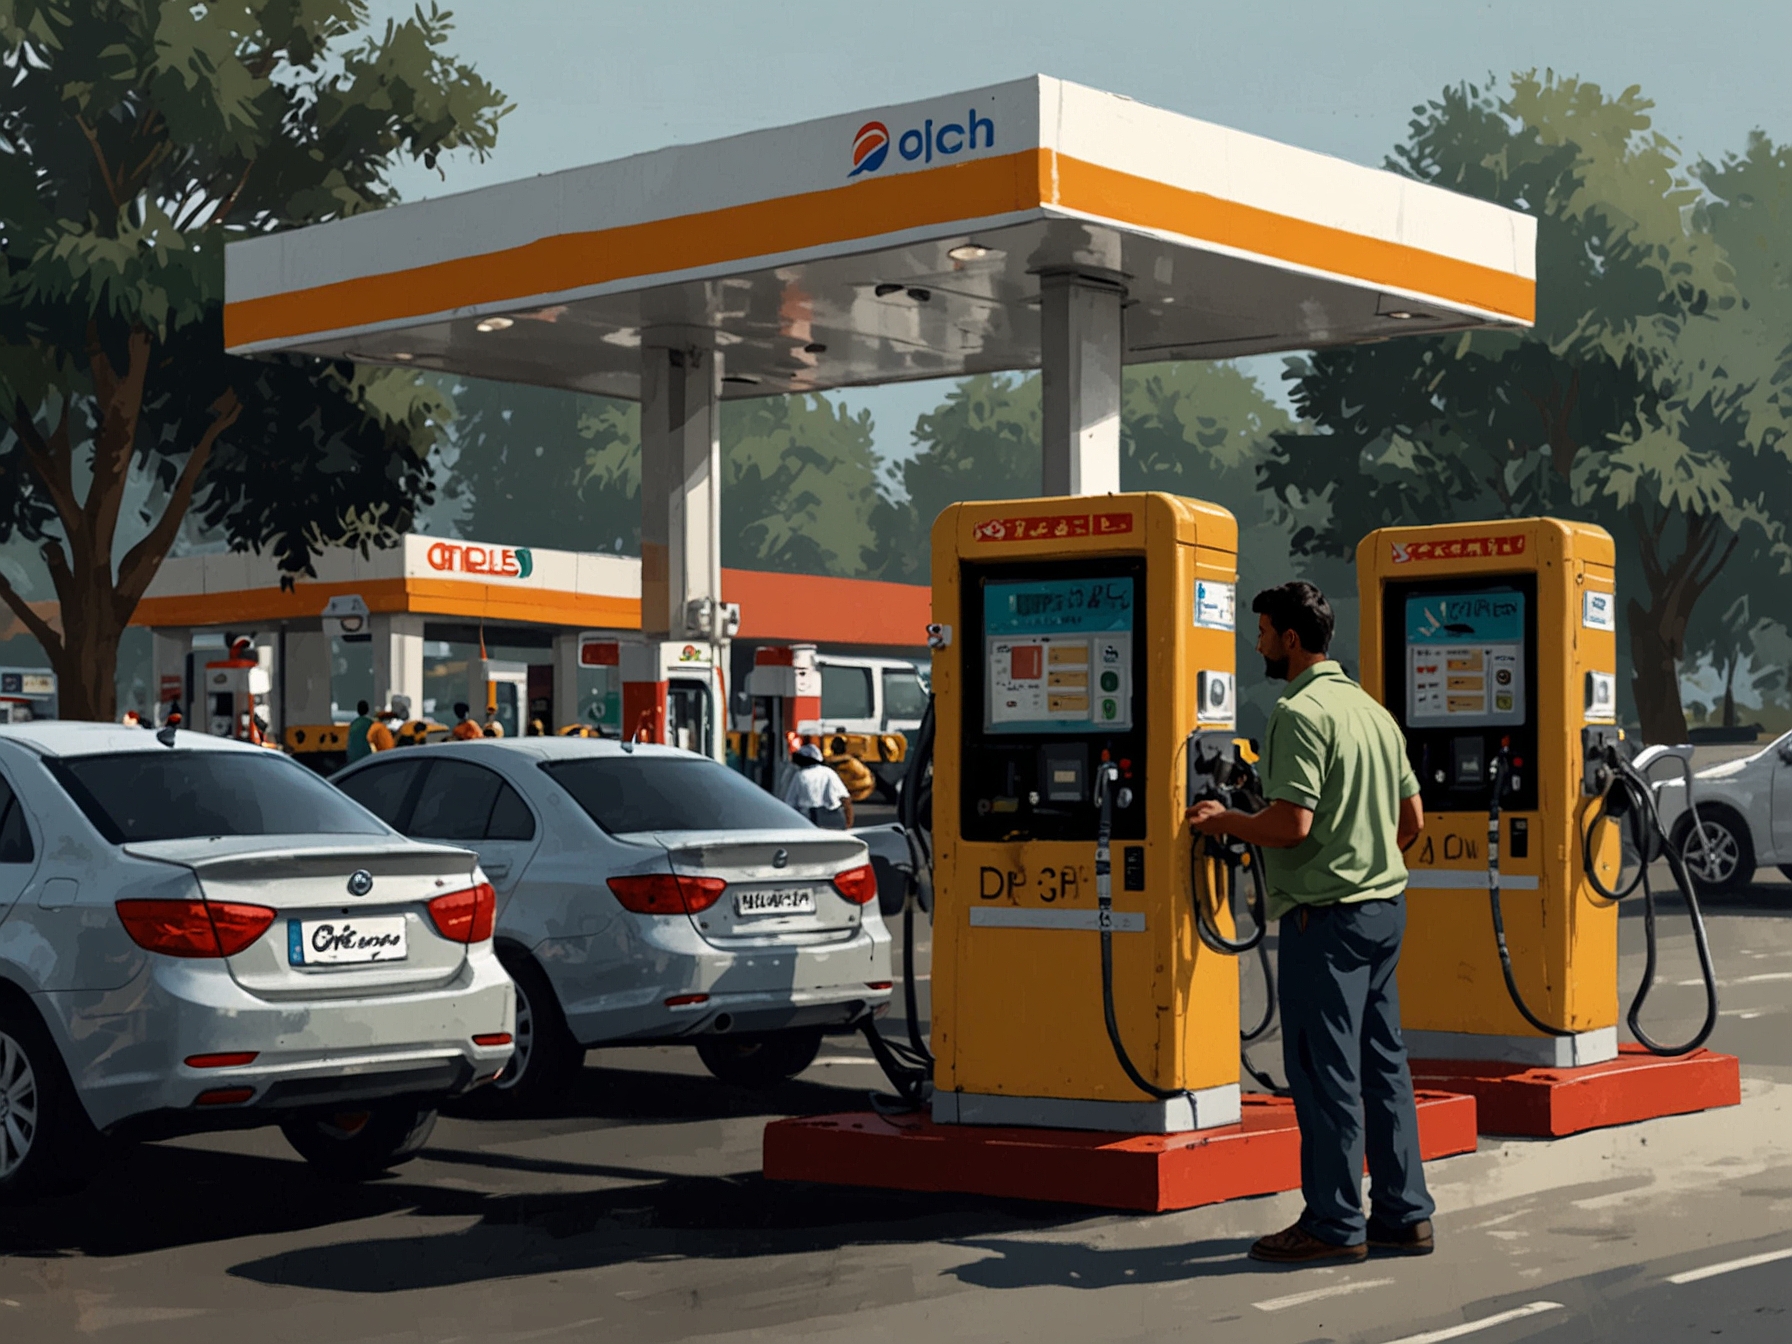 A busy Delhi petrol pump with vehicles lined up for refueling and PUCC checks, reflecting the ongoing operations following the deferral of the planned strike.